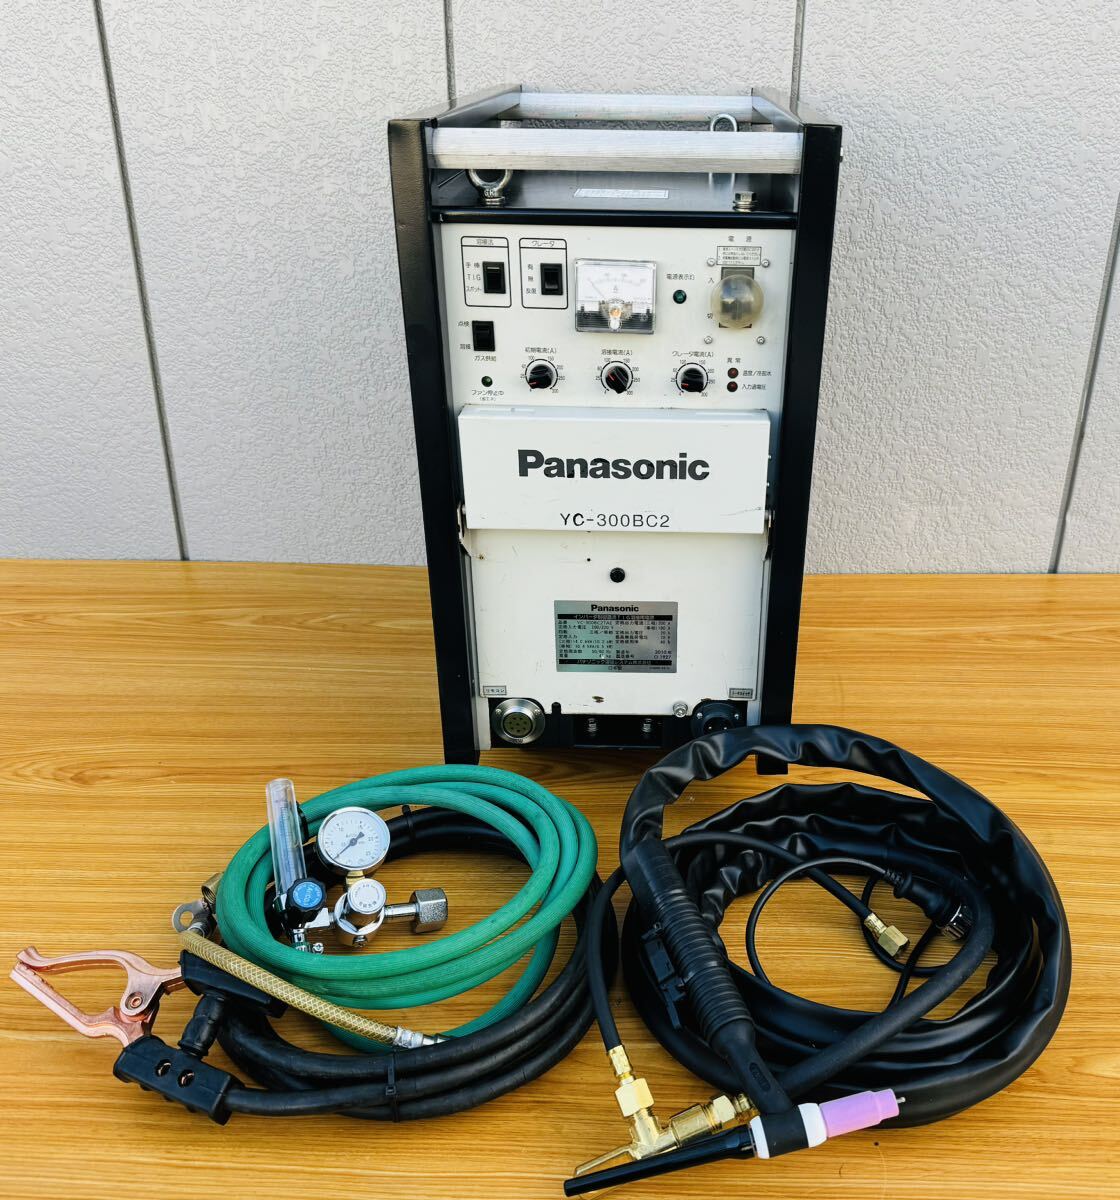 Panasonic inverter control direct current TIG welding for power supply YC-300BC2 operation verification settled 